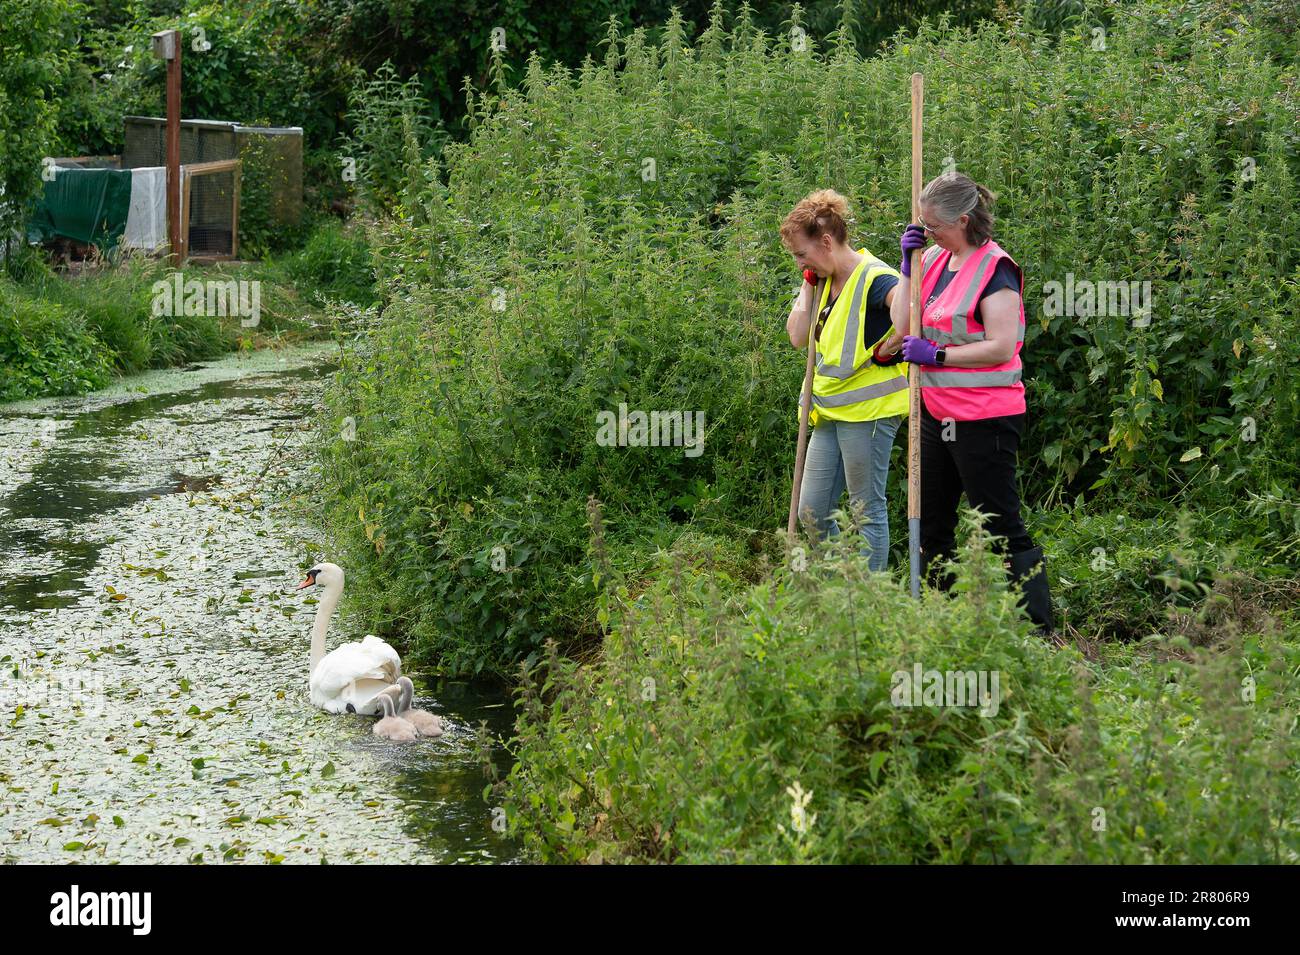 Eton Wick, UK. 18th June, 2023. Work stops to let a swan and her cygnets pass by. Local residents and volunteers from the Eton Wick Waterways Group near Windsor in Berkshire who are supported by Thames 21, were clearing weeds from Boveney Ditch in Eton Wick today so as to improve the flow of water in the waterway. They work to conserve and protect  the natural environment and wildlife surrounding the Eton Wick waterways. Joining them to clear the weeds were newly elected Windsor, Eton and Eton Wick Liberal Democrats Councillors, Devon Davies and Mark Wilson. Frank O’Kelly a Councillor from nea Stock Photo